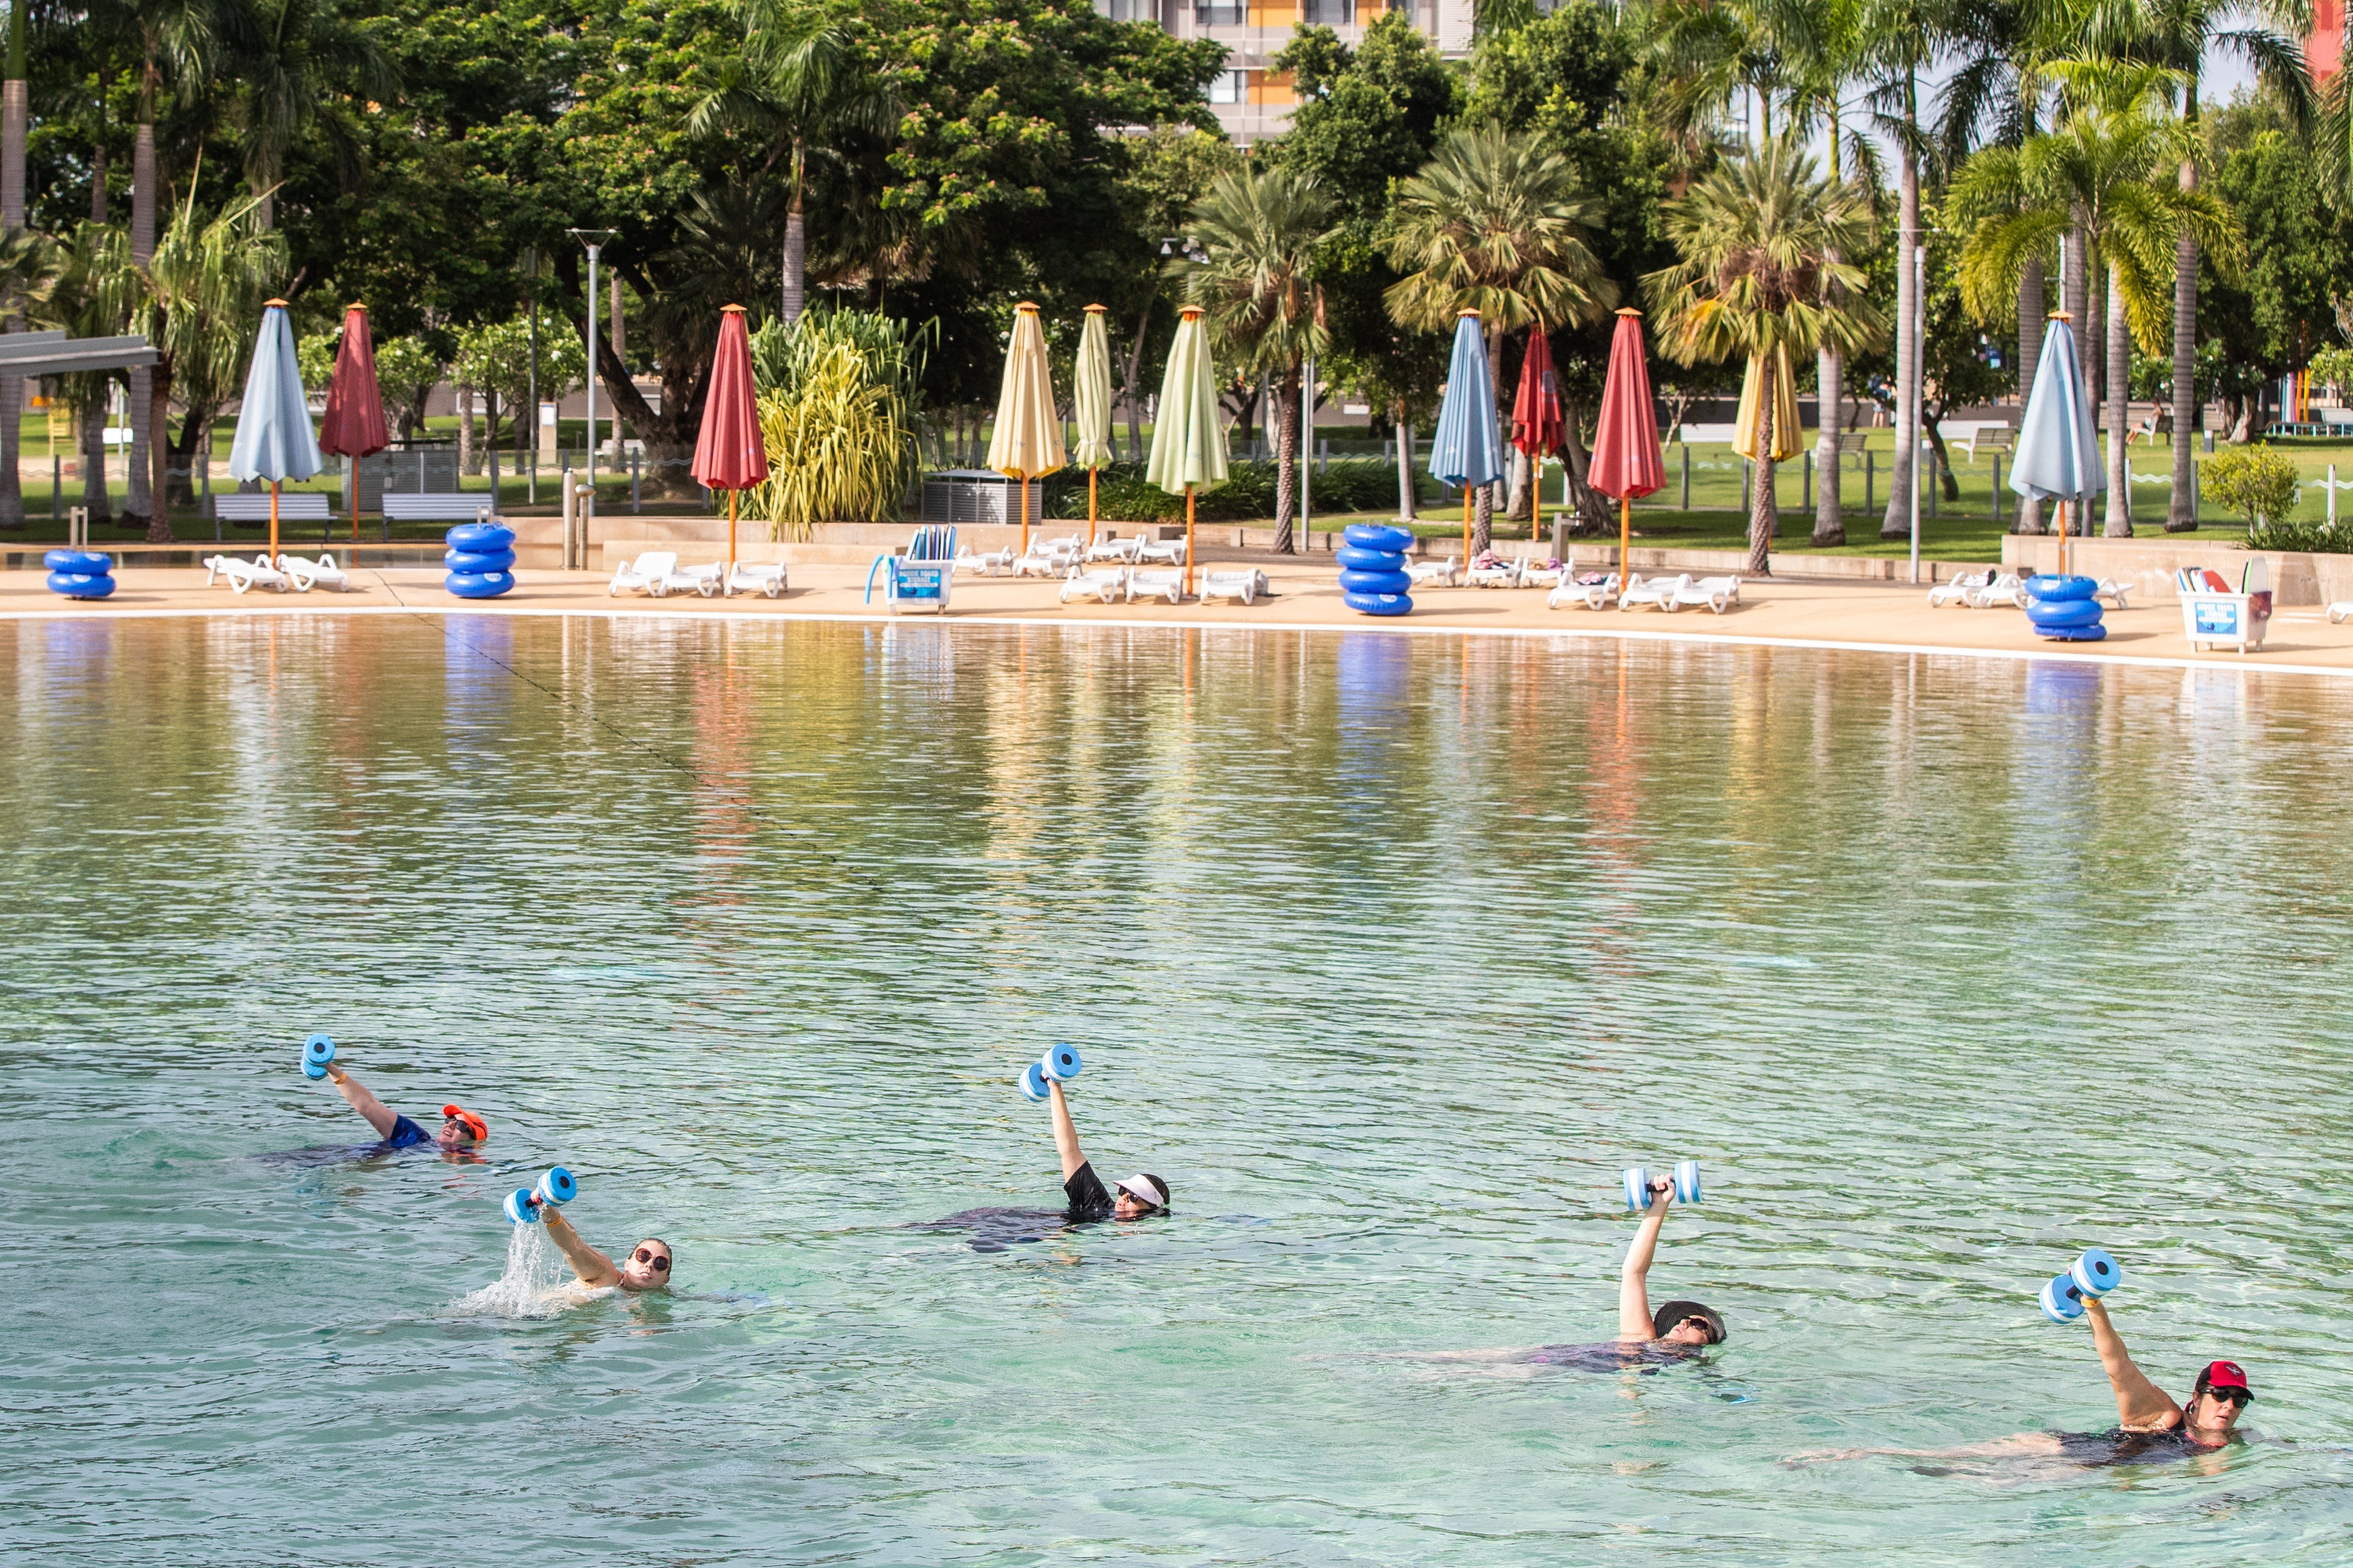 Aqua fitness in the Wave Lagoon - Accommodation Guide